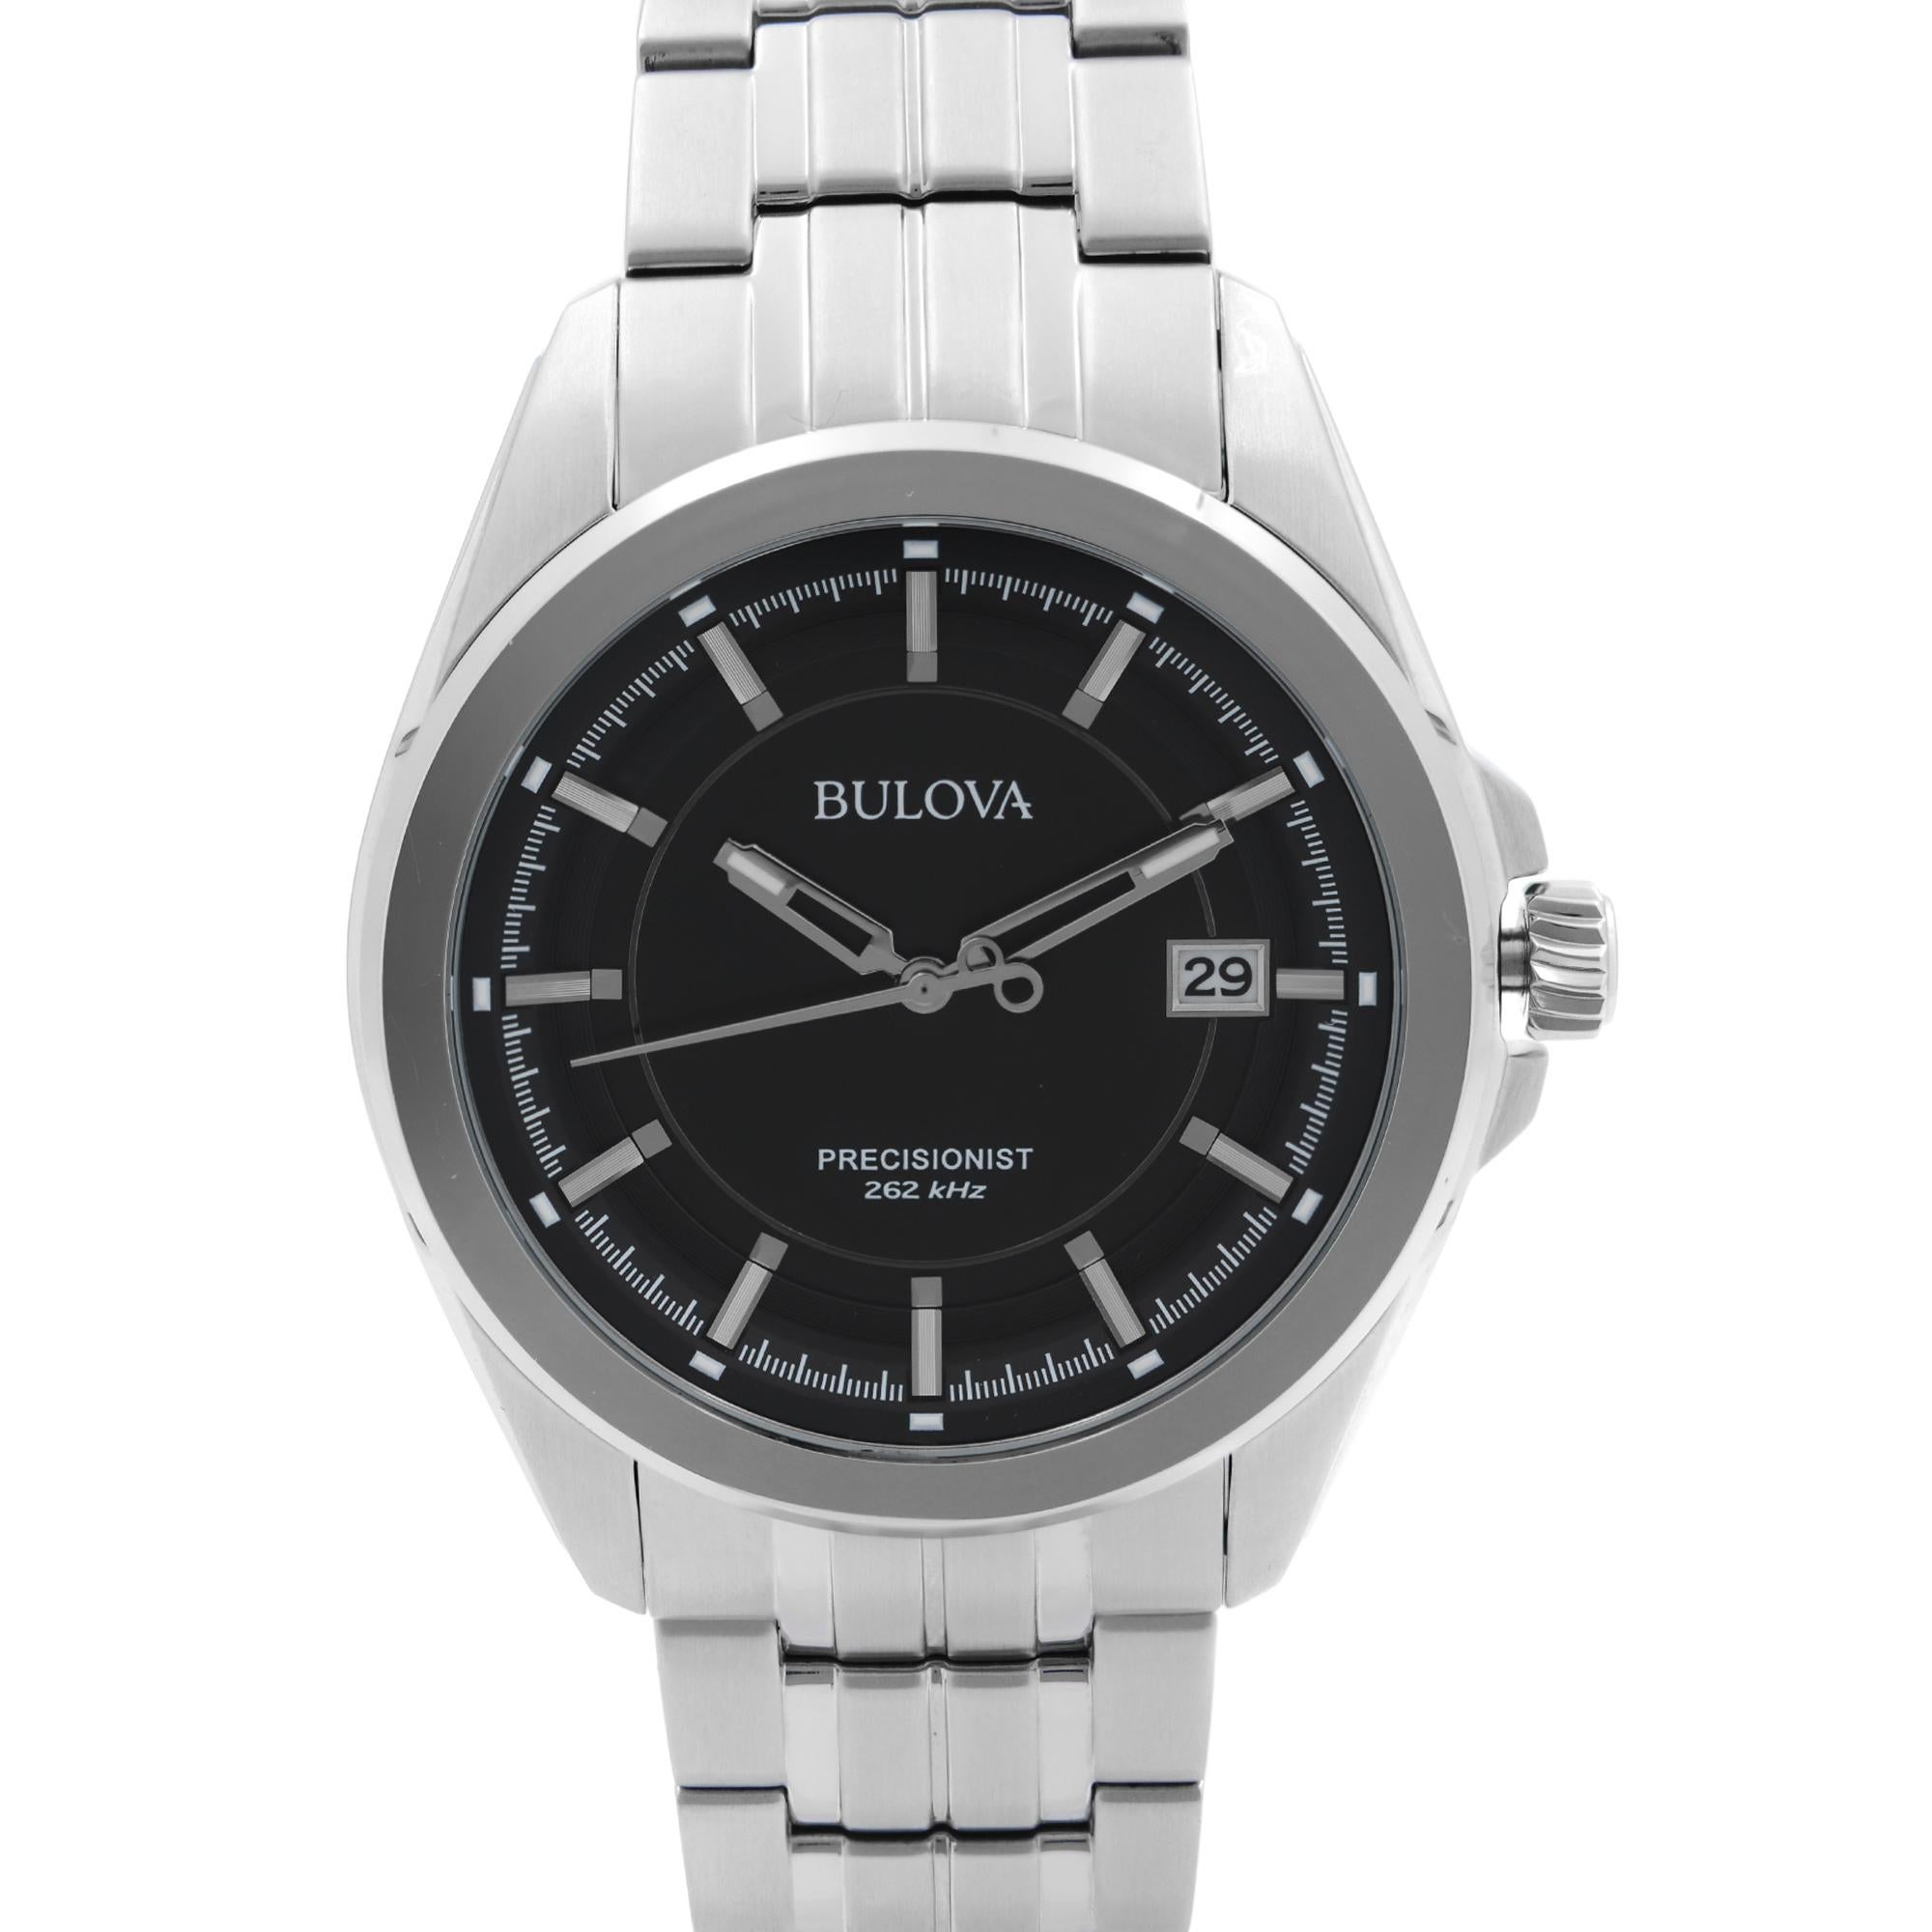 Unworn Bulova Precisionist 96B252. The Timepiece May Have Missing Tags. The Watch is empowered by a Quartz Movement. This Beautiful Timepiece Features: Stainless Steel & Bracelet. Fixed Steel Bezel. Black Dial with Silver-Tone Luminous hands and